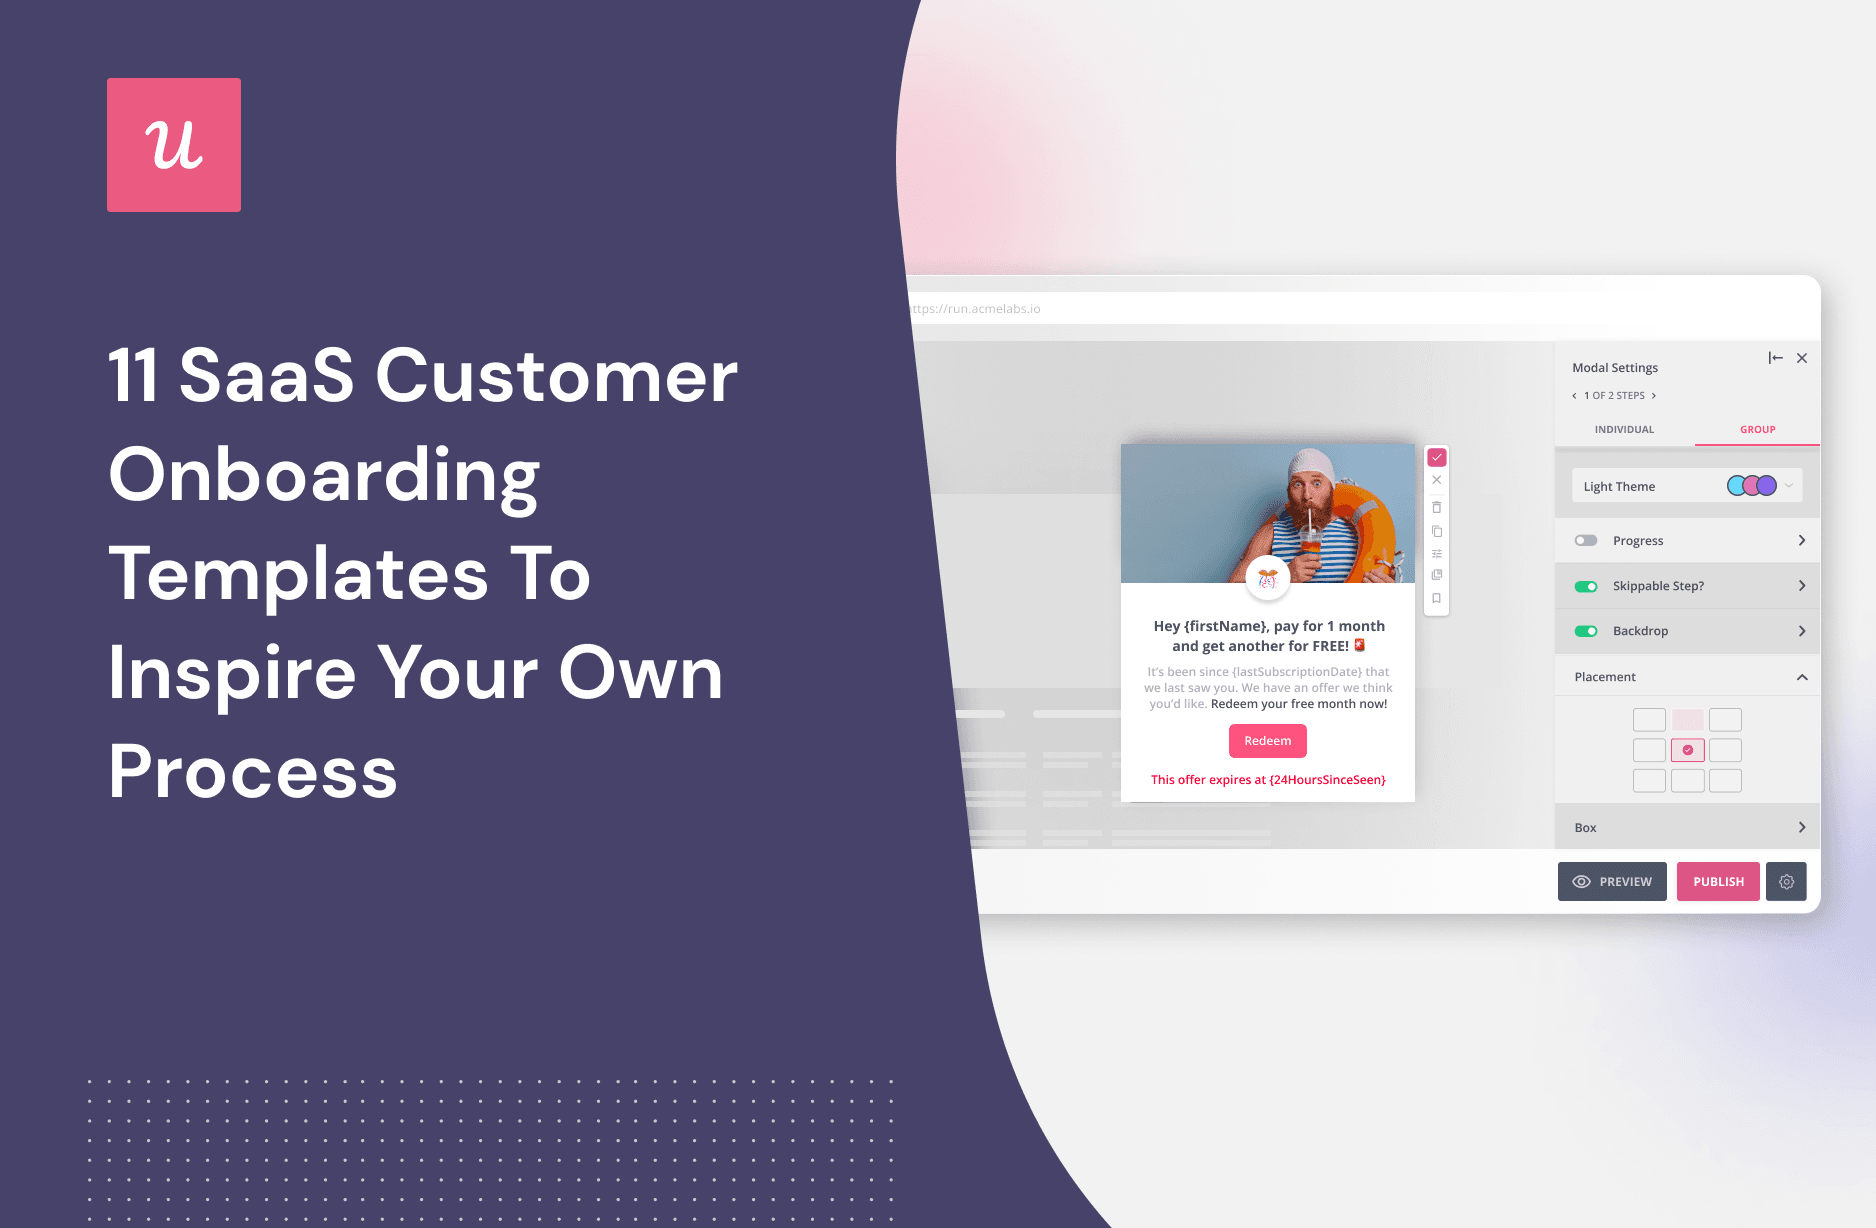 11 SaaS Customer Onboarding Templates To Inspire Your Own Process cover